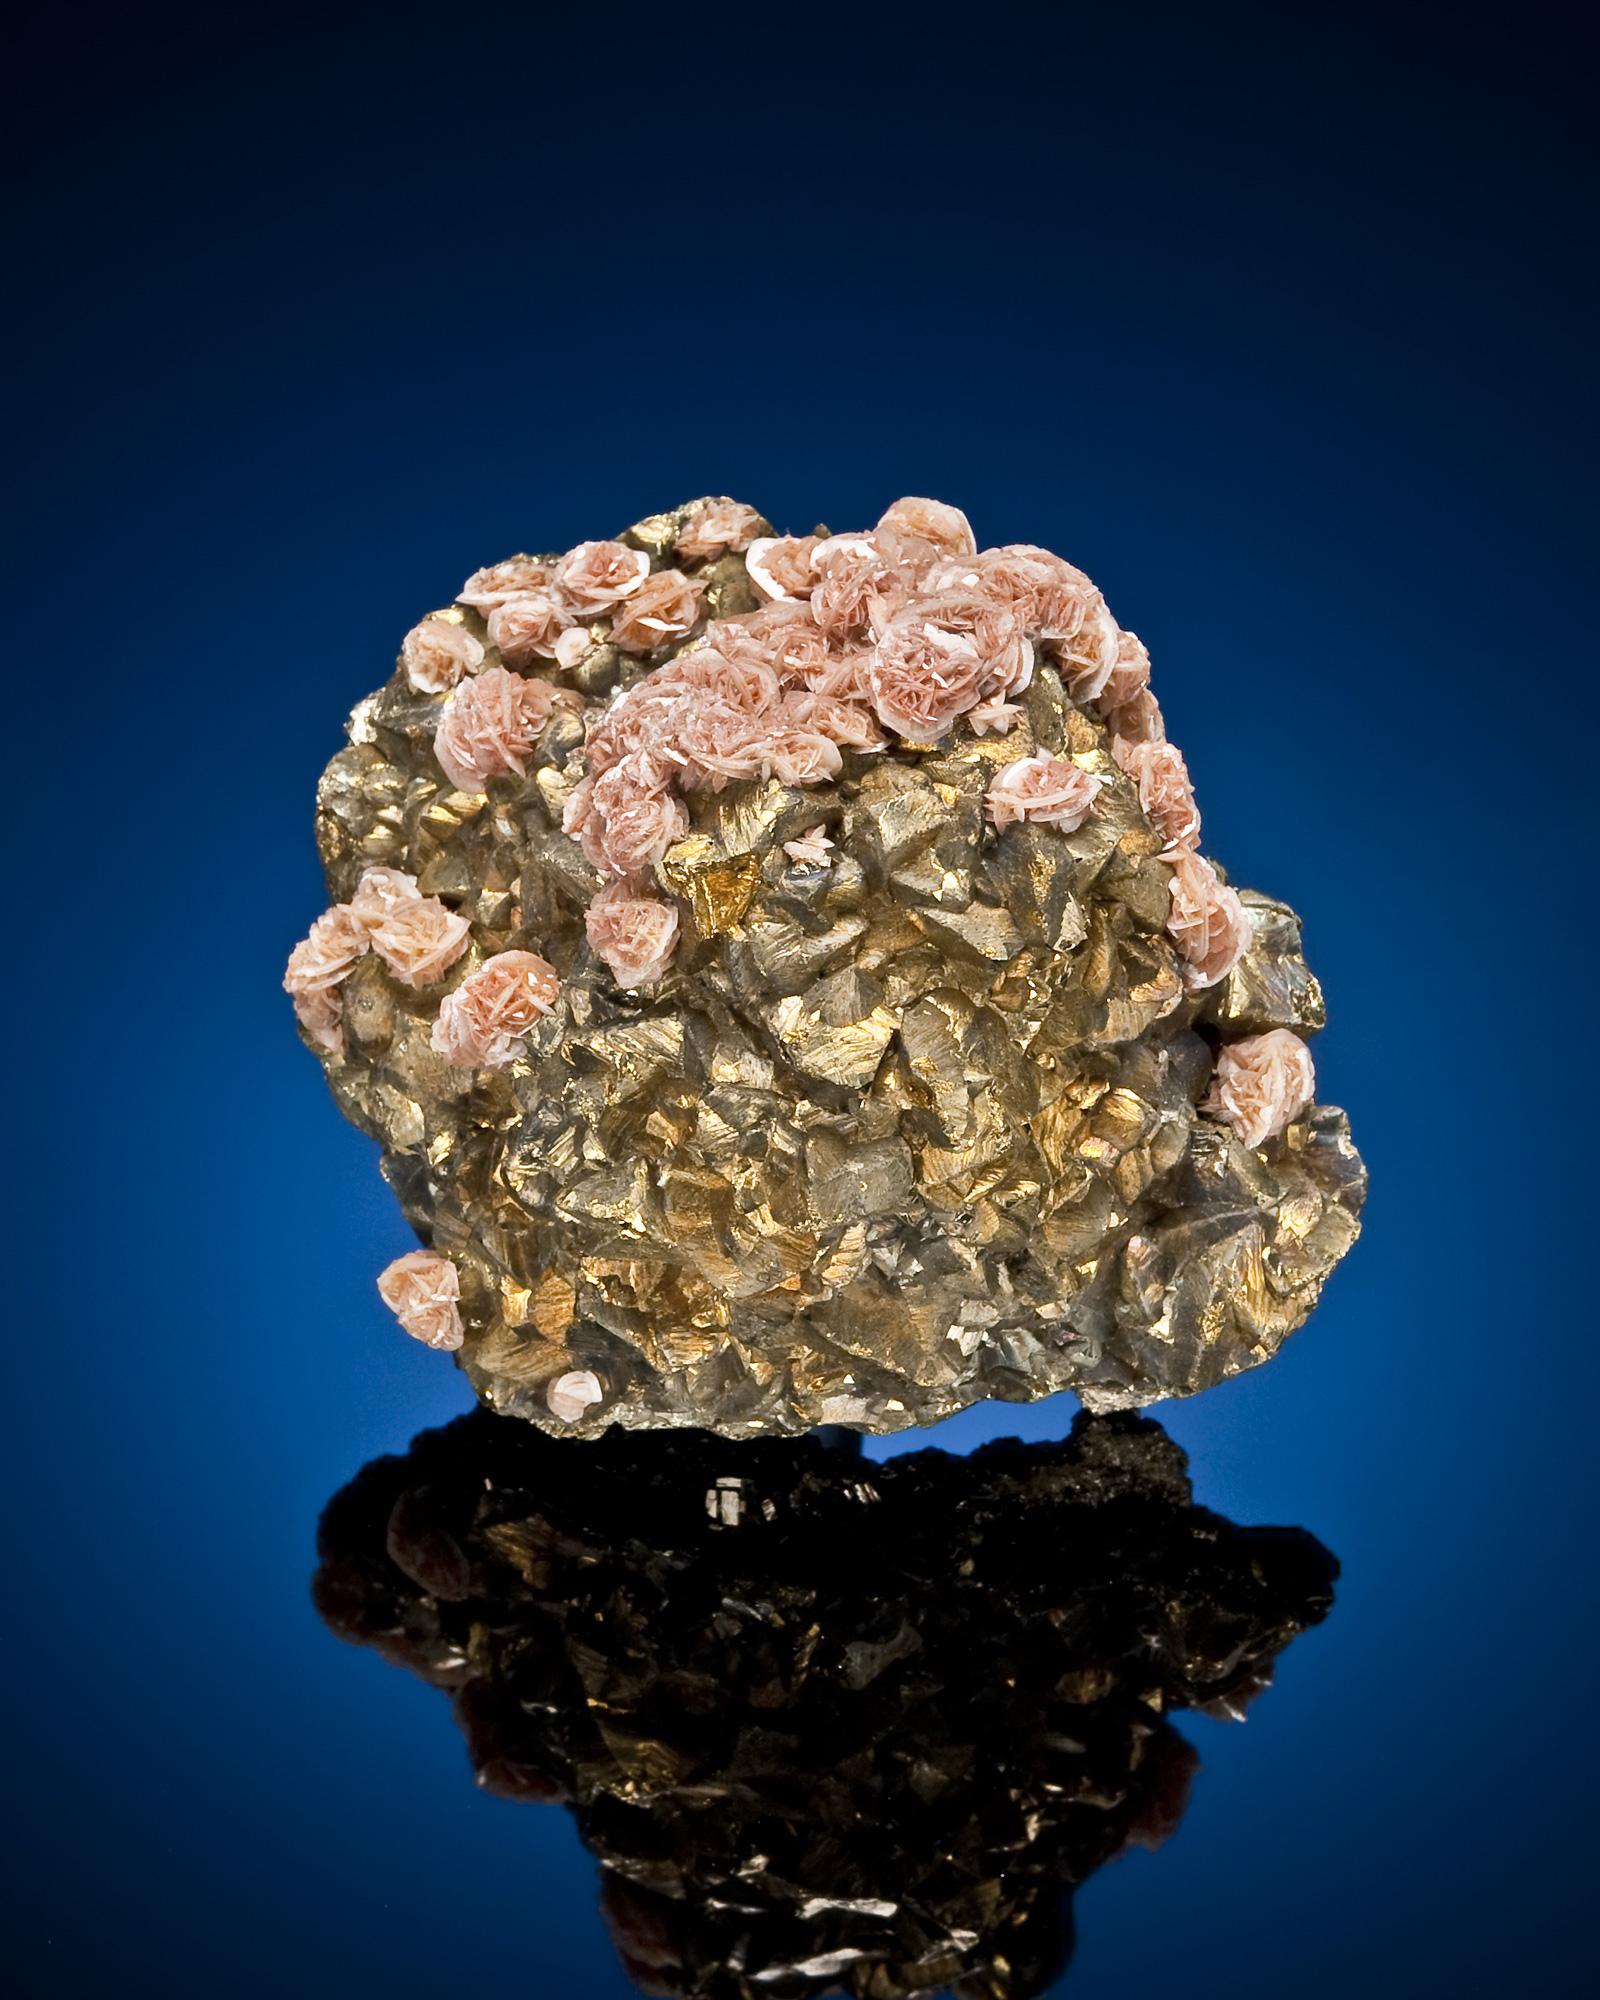 Siderite/rhodochrosite(?), chalcopyrite on pyrite; 5.7 cm tall. Eagle Mine, Gilman, Colorado. National Mining Hall of Fame Museum collection. Photo credit: Mark Mauthner.